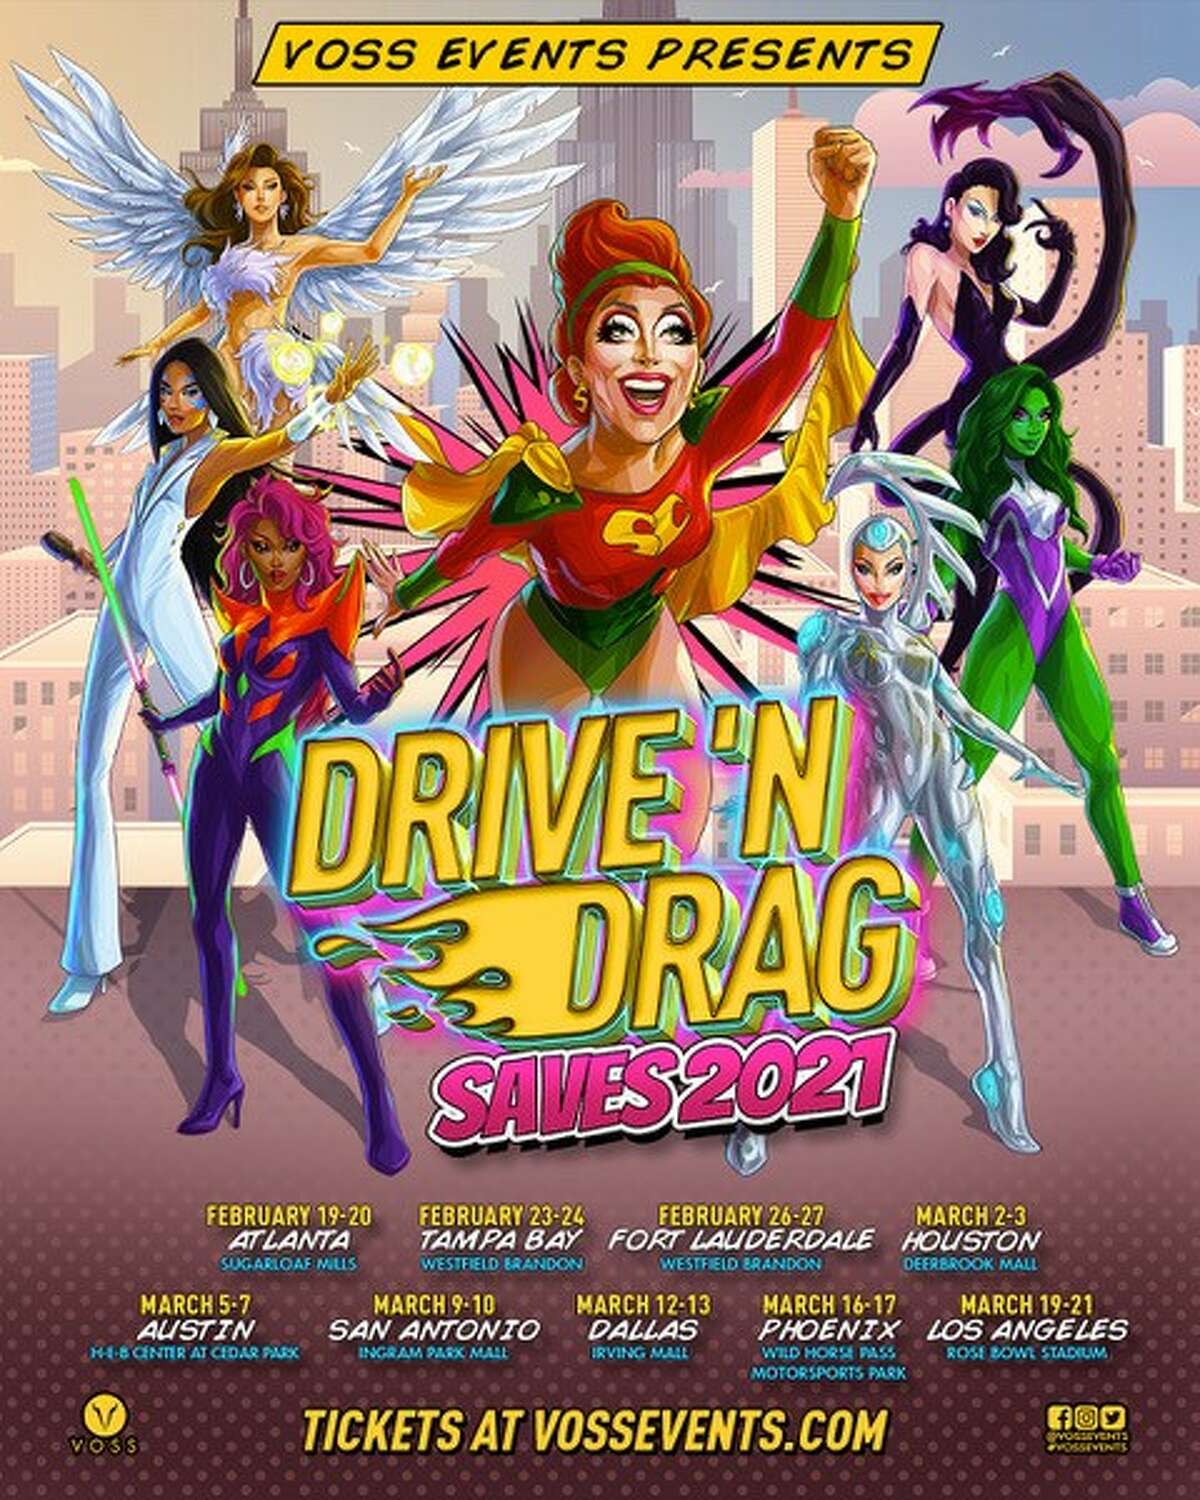 For all "RuPaul's Drag Race" fans, a drive-in show featuring stars like Bianca Del Rio and Aquaria is coming to San Antonio next year.